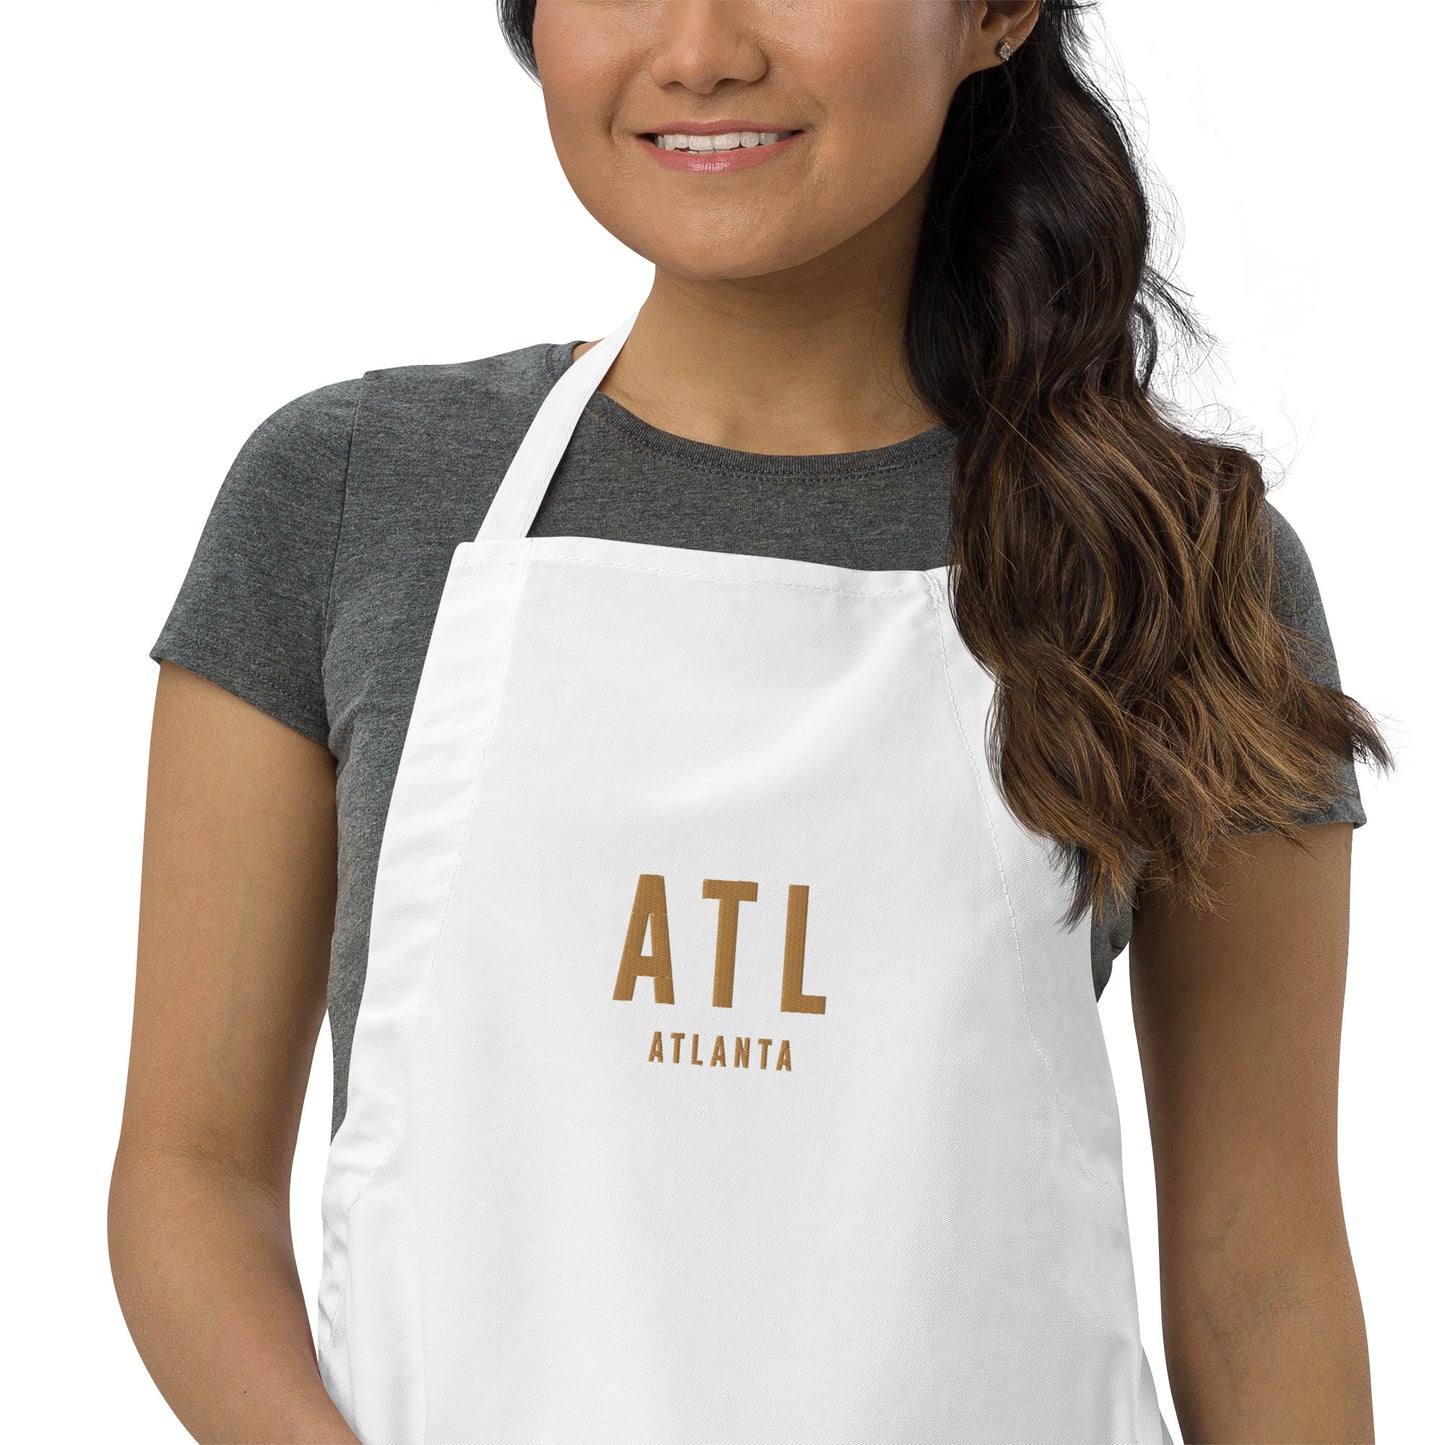 City Embroidered Apron - Old Gold • ATL Atlanta • YHM Designs - Image 08